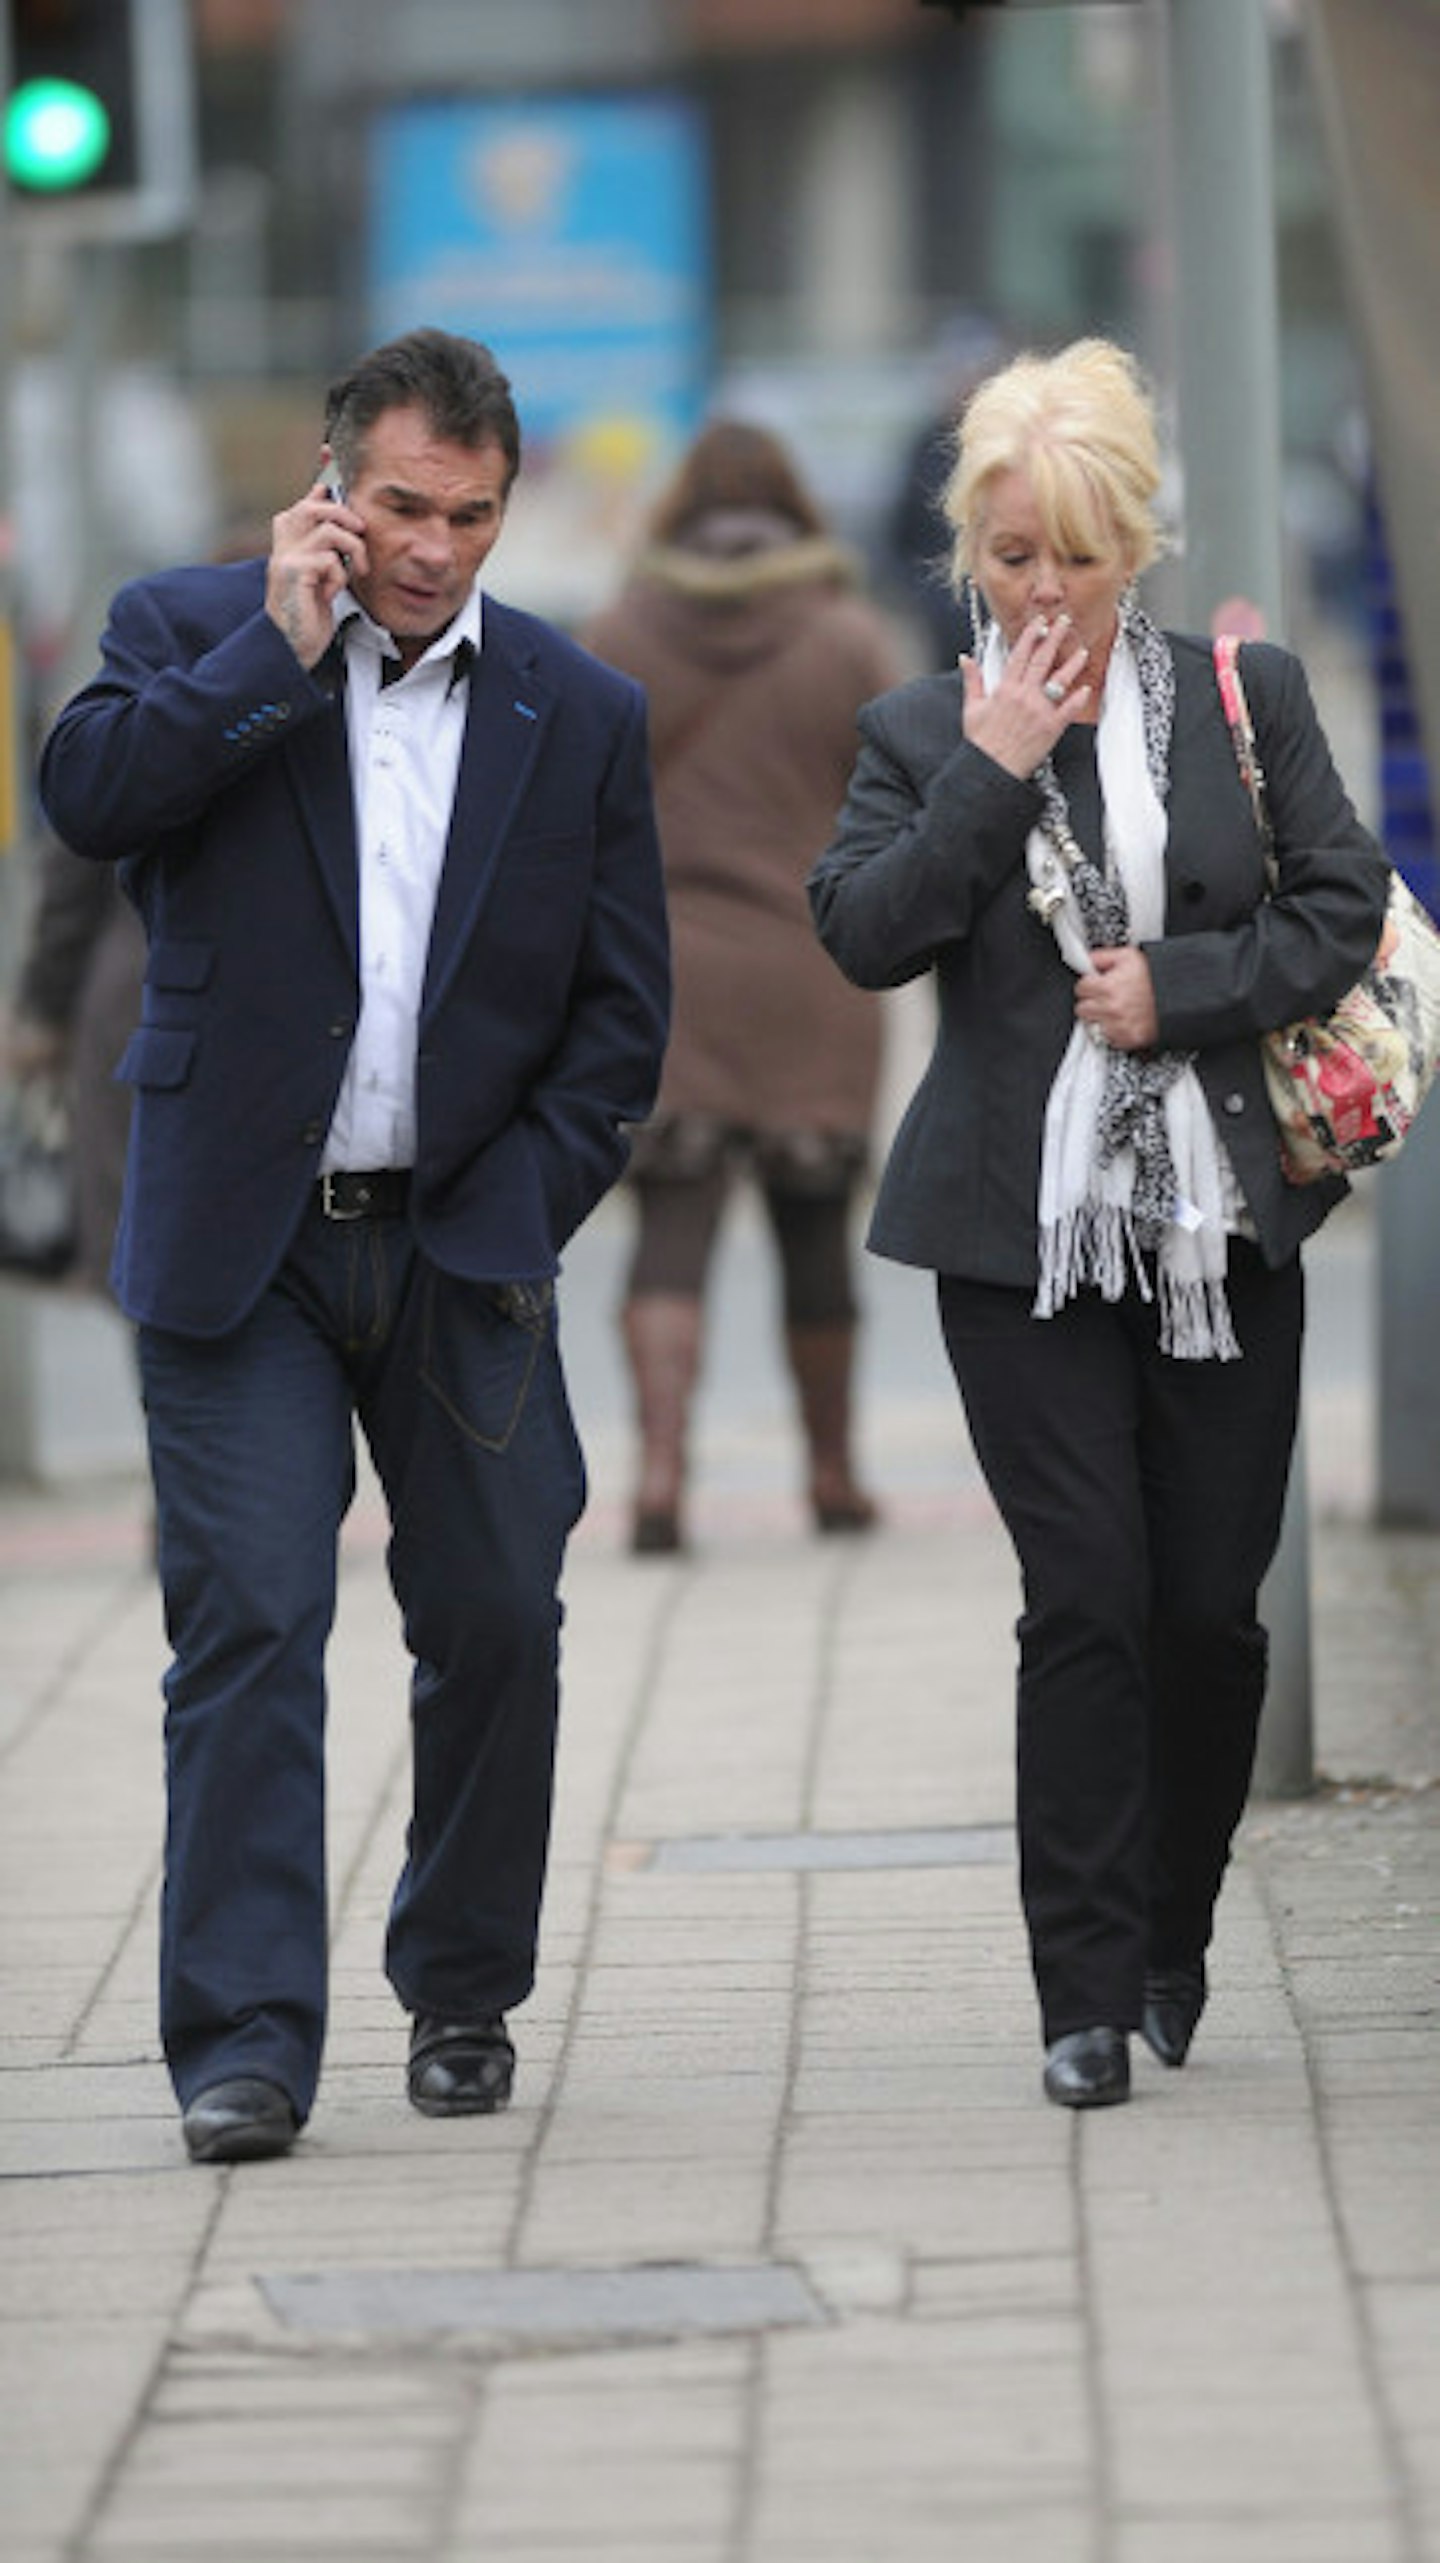 Paddy Doherty with his wife Roseanne